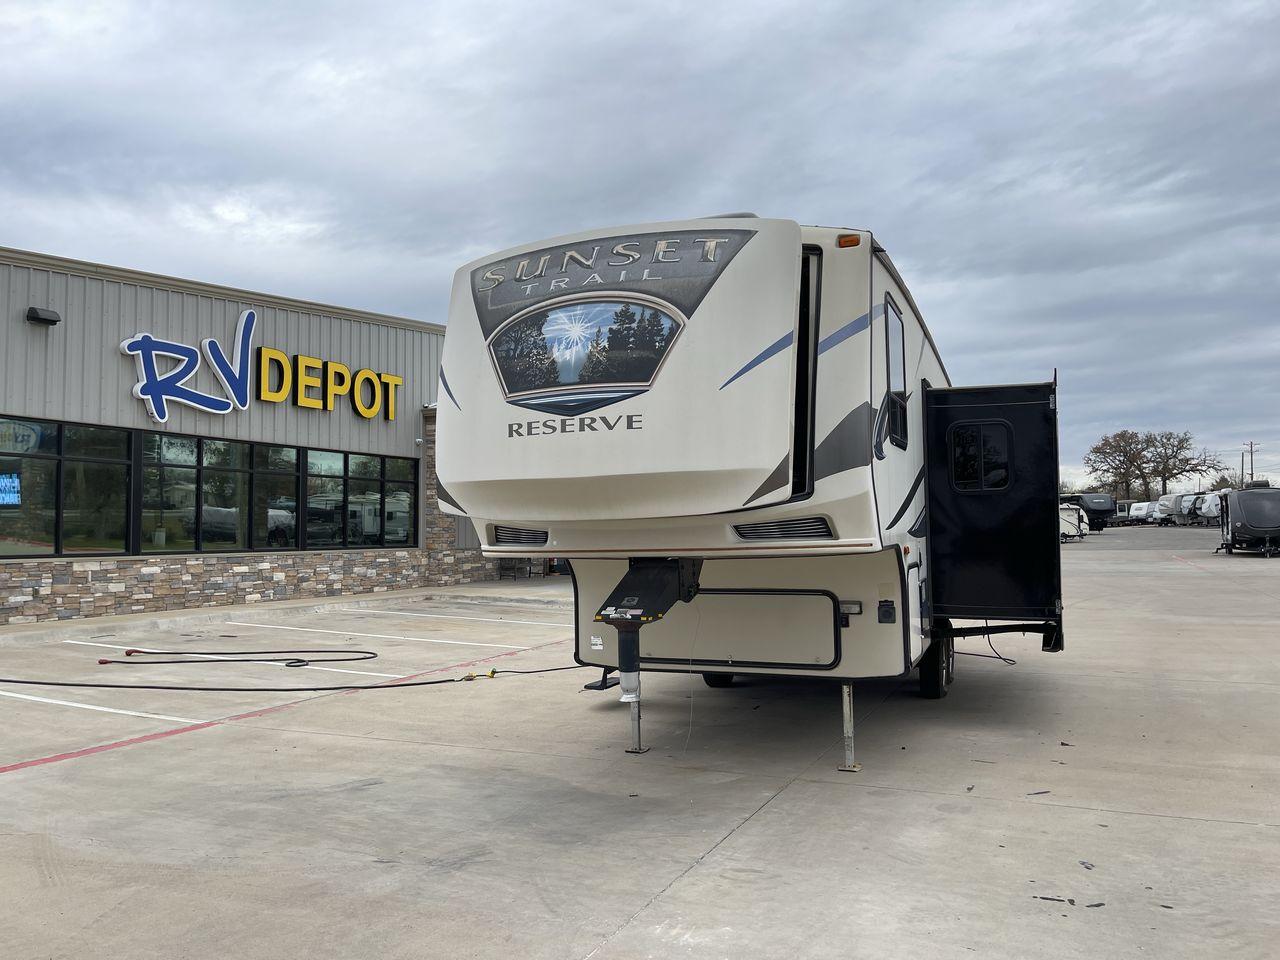 2015 CROSSROADS SUNSET TRAIL RESERVE (4V0FC2624FB) , Length: 30.17 ft | Dry Weight: 6,401 lbs | Gross Weight: 9,542 lbs | Slides: 2 transmission, located at 4319 N Main Street, Cleburne, TX, 76033, (817) 221-0660, 32.435829, -97.384178 - This model has the right mix of space and maneuverability, with a length of 30 feet and a dry weight of 6,401 pounds. With a strong aluminum frame and fiberglass sidewalls, it will last for a long time on the road, making it a great choice for travelers who want both style and dependability. The Sun - Photo #0